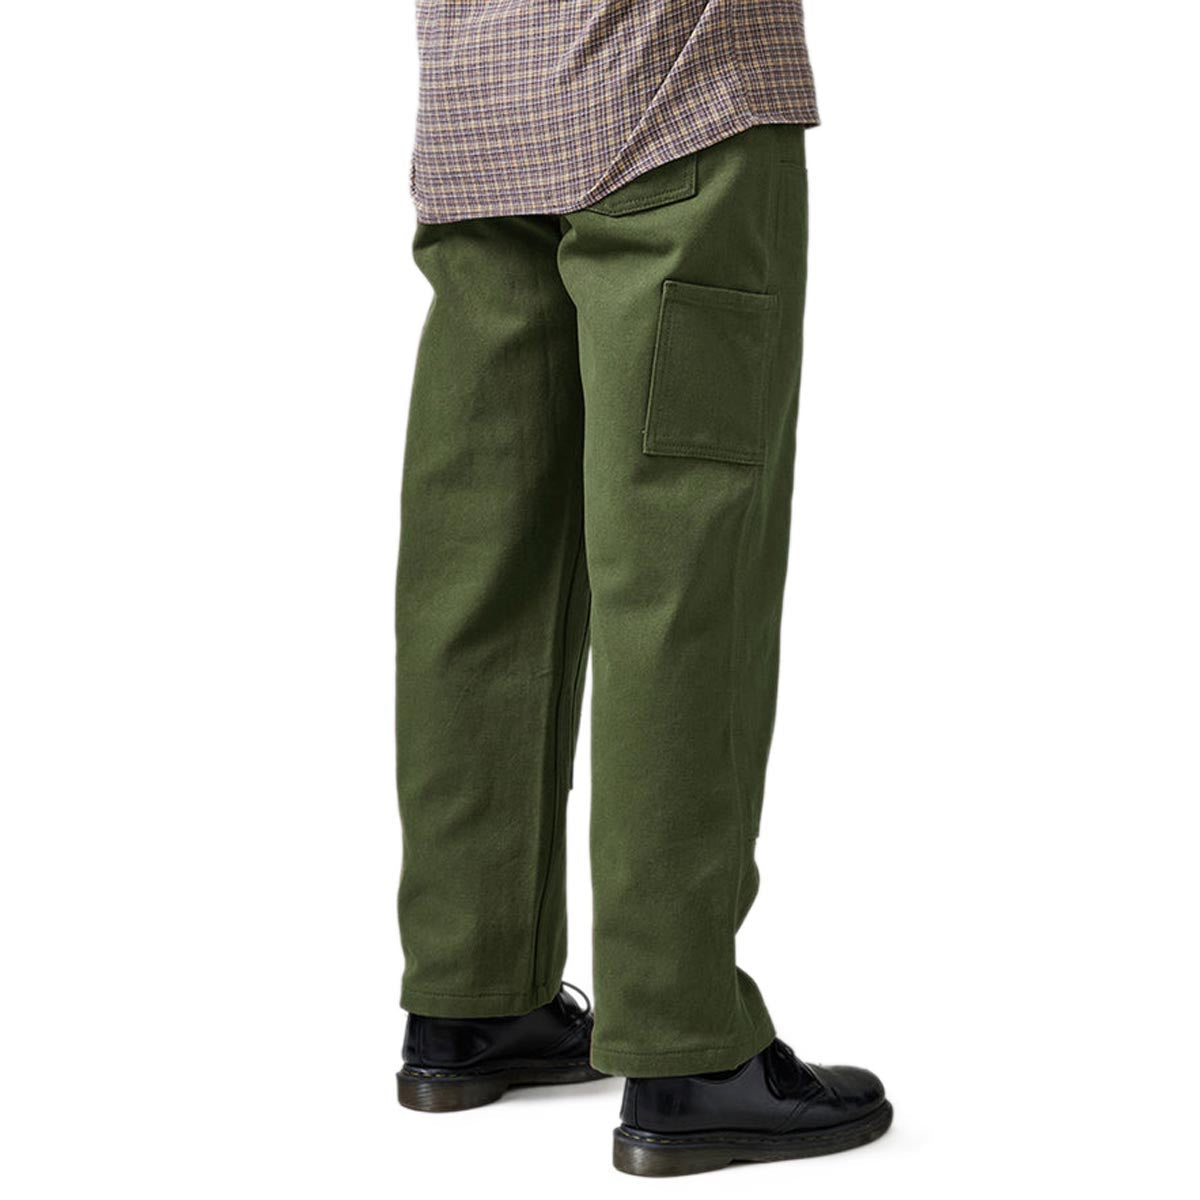 Passport Double Knee Diggers Club Pants - Olive image 3